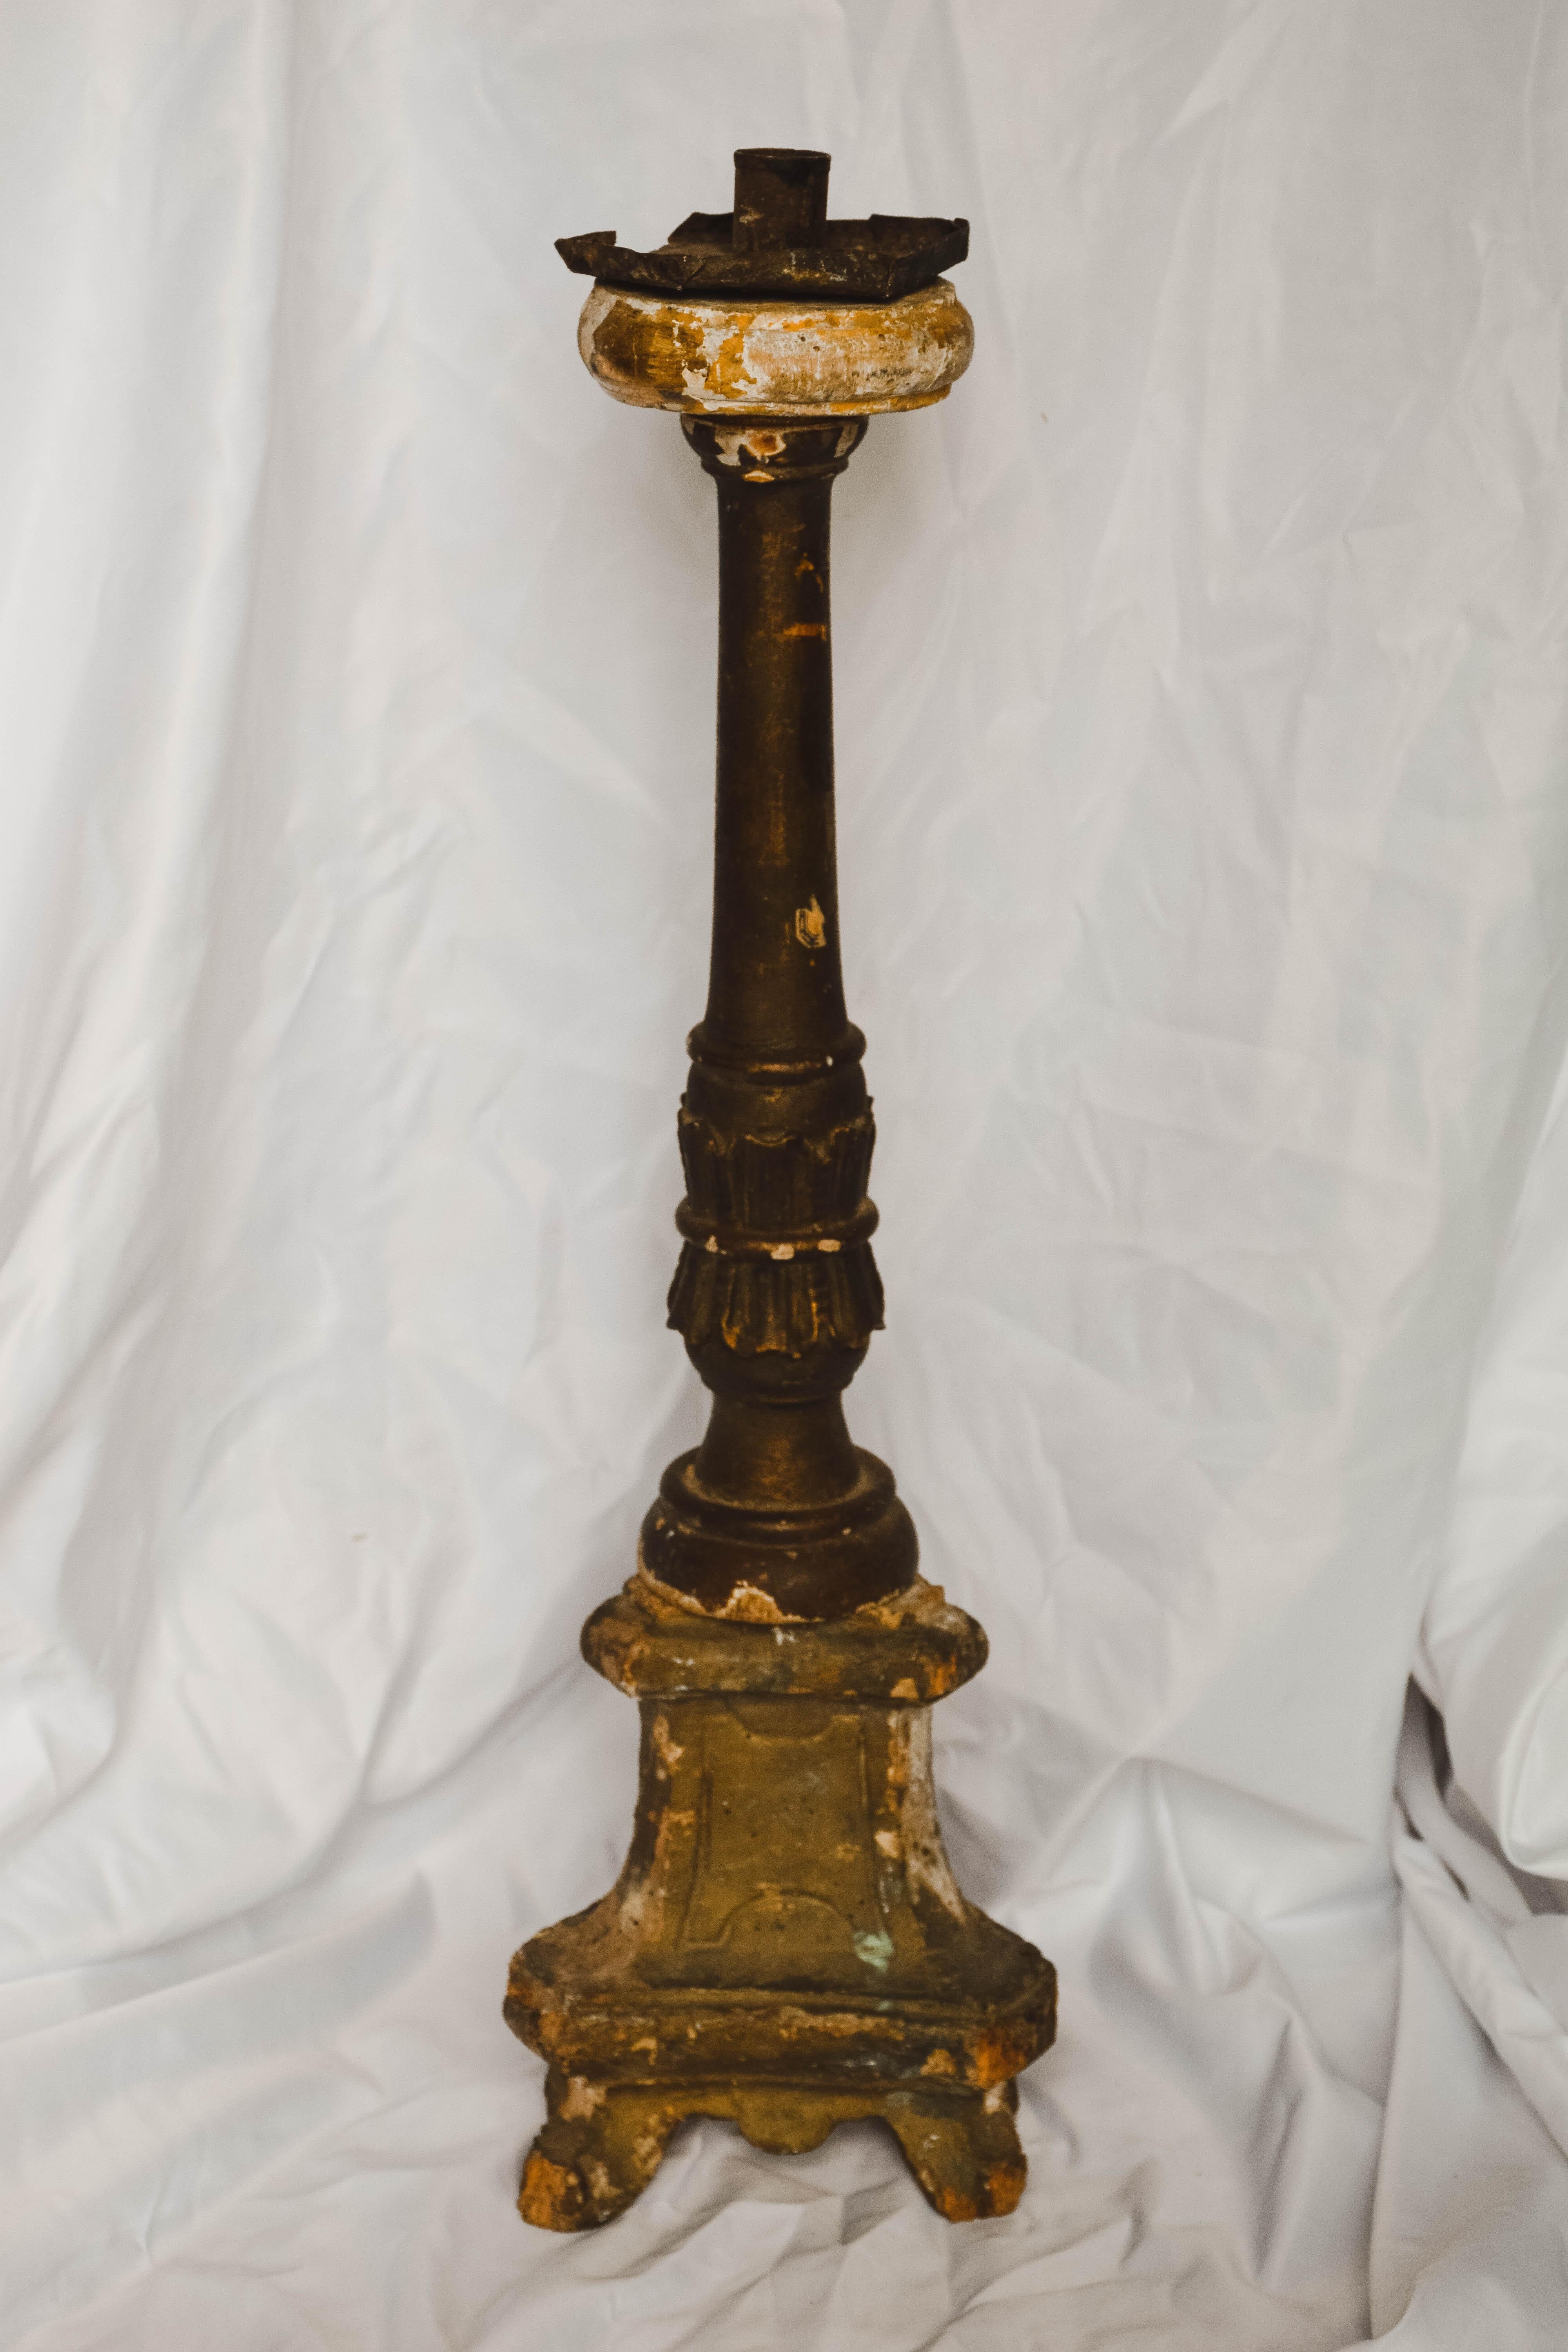 Other Antique Italian Giltwood Alter Candlestick